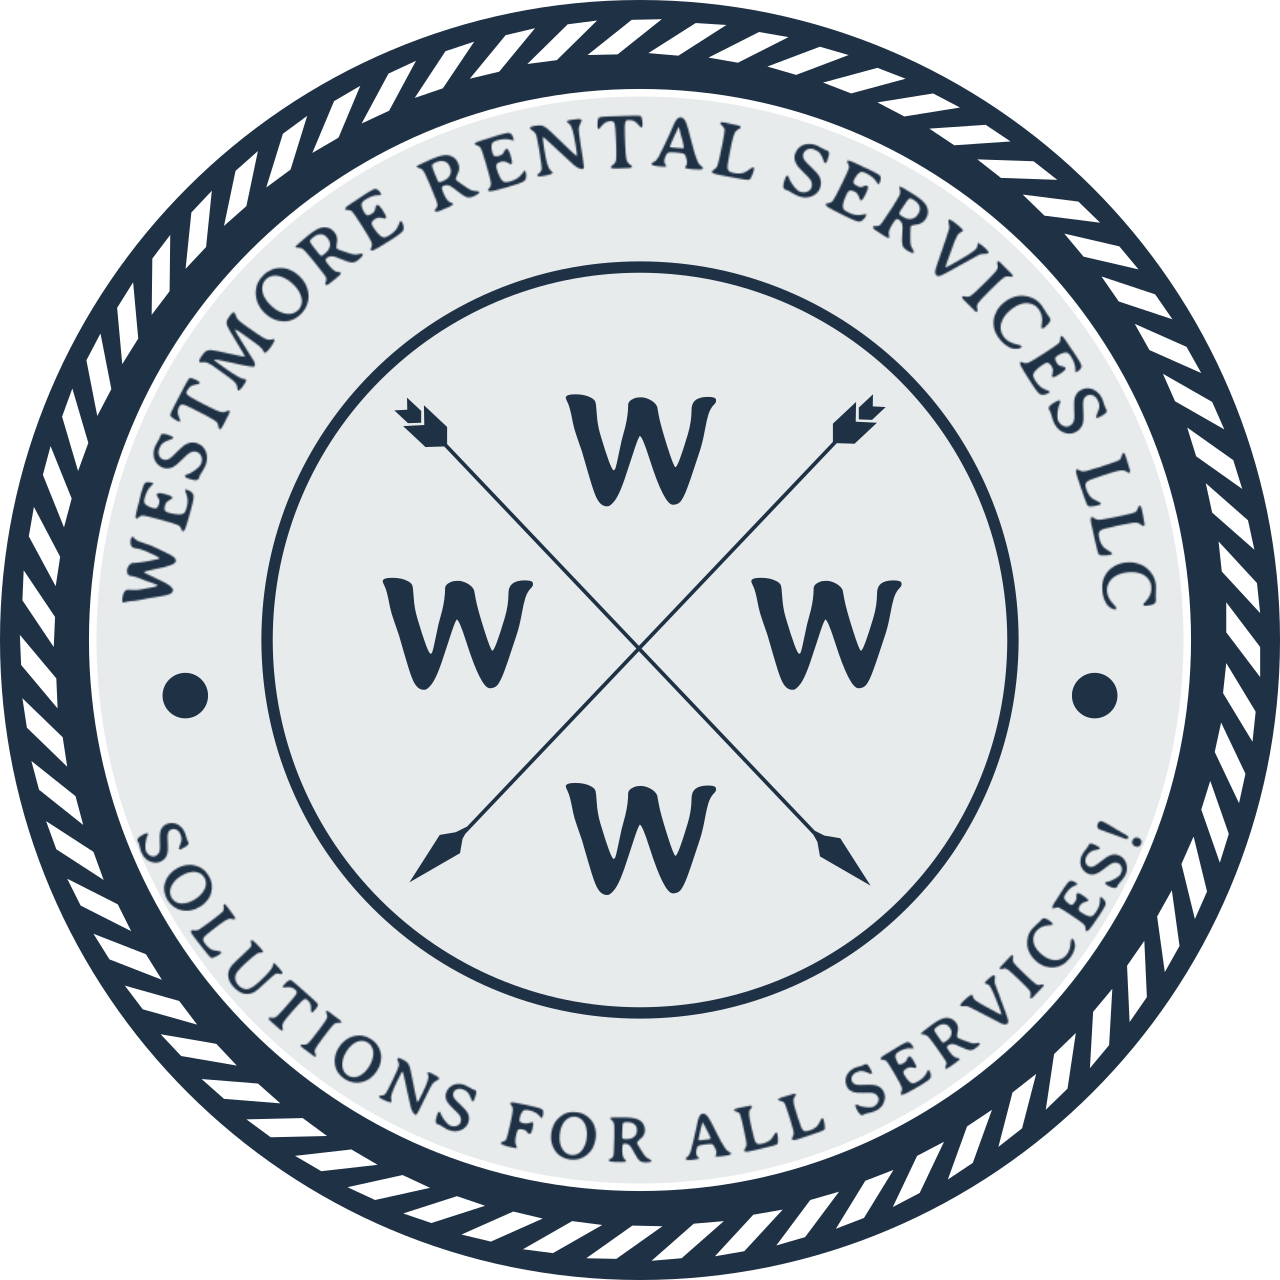 WESTMORE RENTAL SERVICES LLC's web page